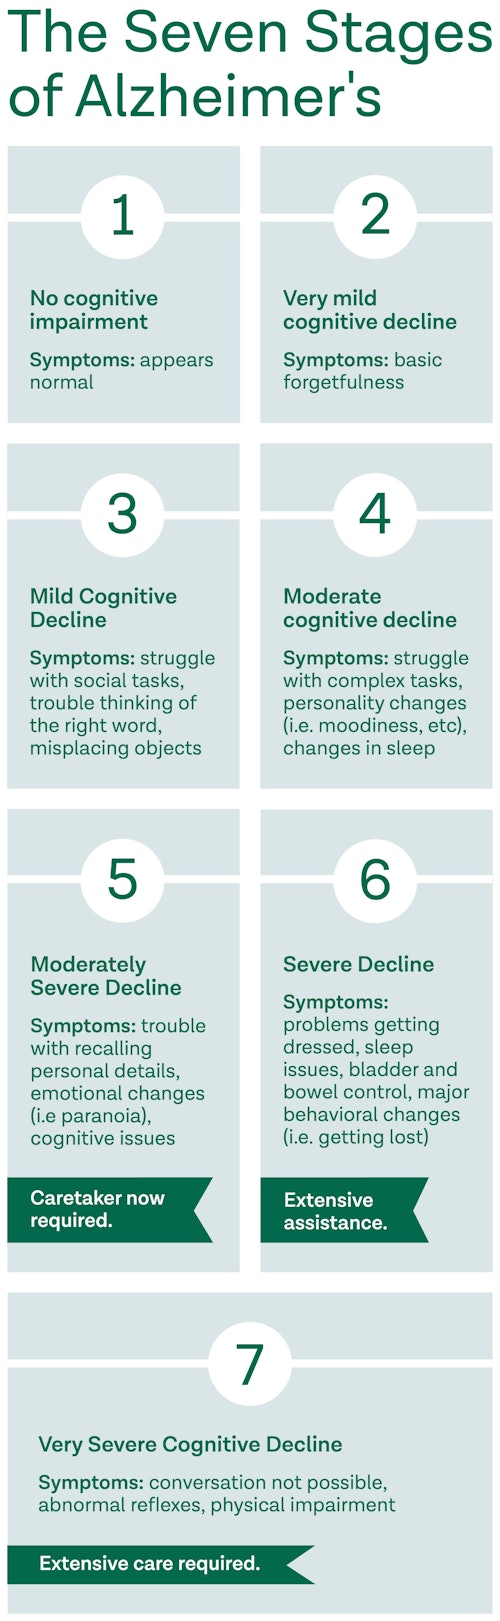 Chart that breaks down the 7 stages of Alzheimers disease